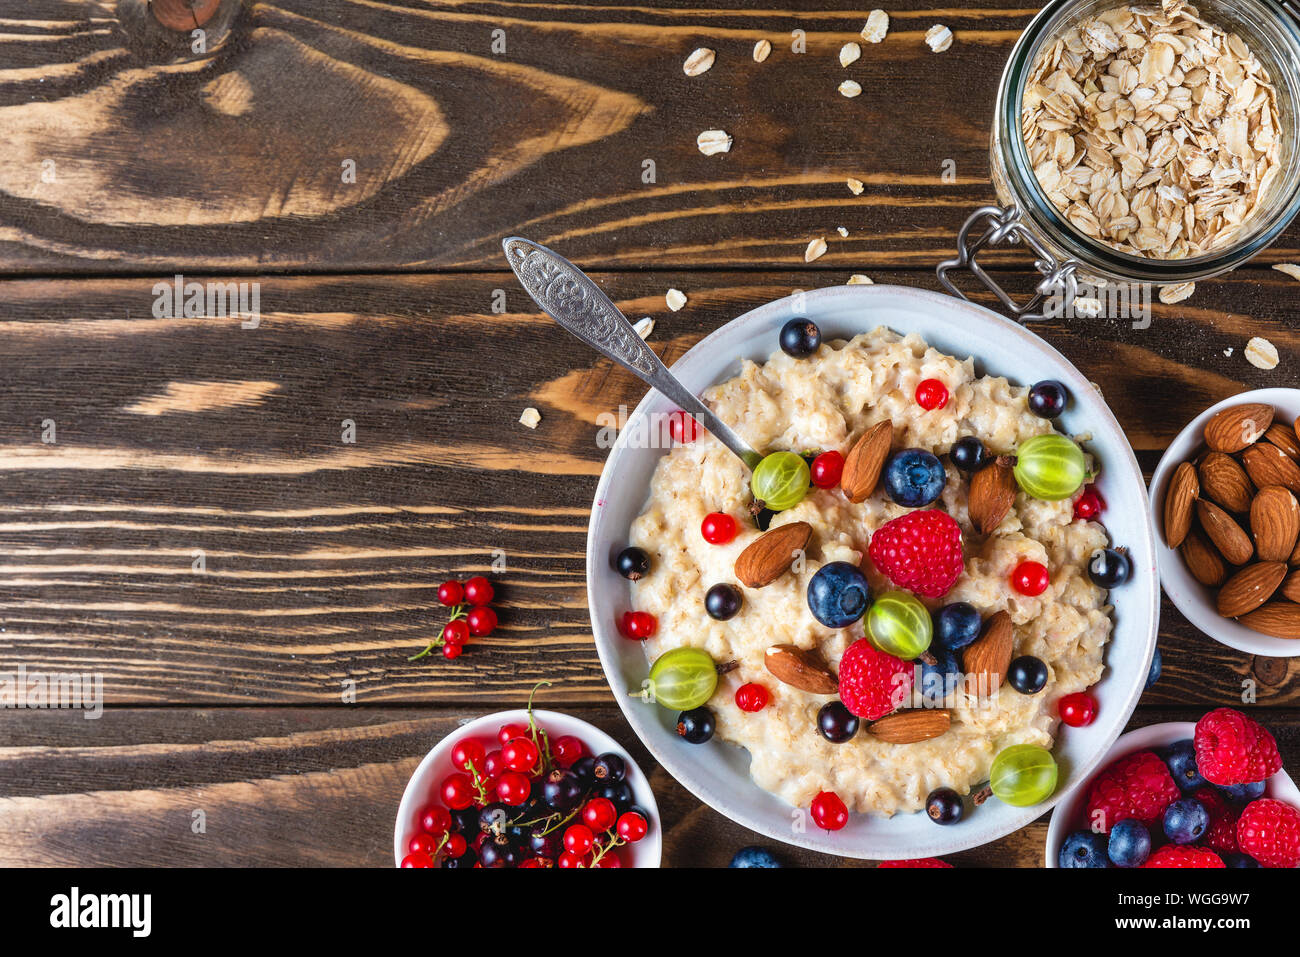 healthy breakfast. bowl of oatmeal porridge with berries, nuts and spoon on rustic wooden table. top view with copy space Stock Photo